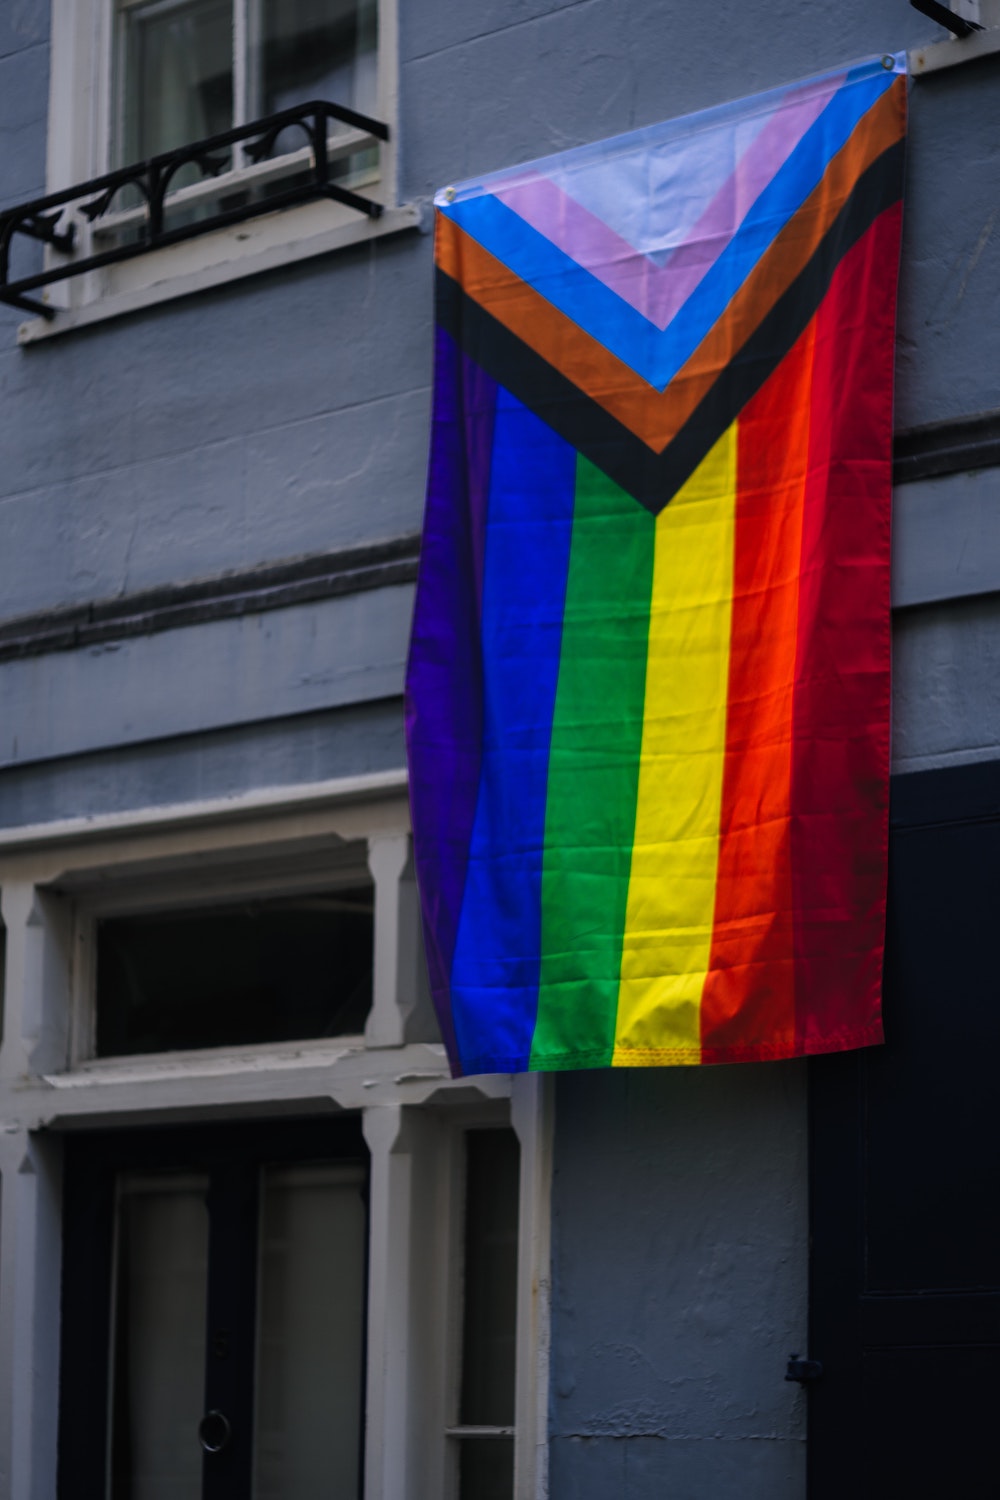 A pride flag hangs in front of a grey building. The flag includes the rainbow colours, as well as the pink, blue, brown, and black stripes.